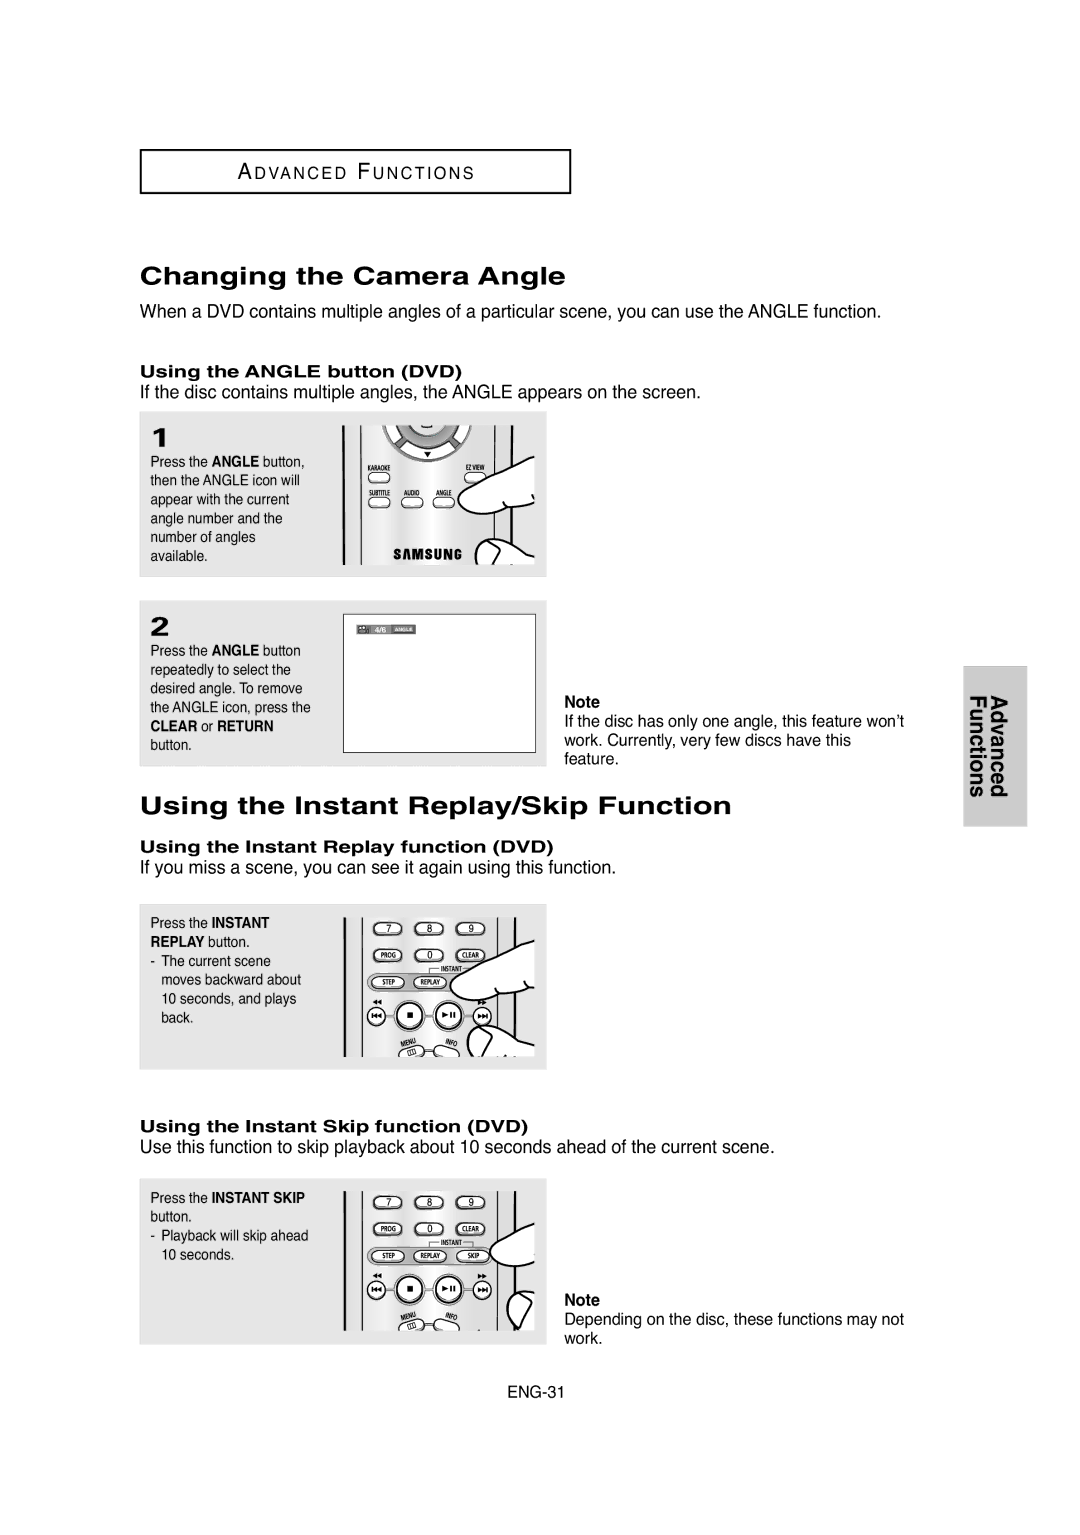 Samsung DVD-P250K/AFR manual Changing the Camera Angle, Using the Instant Replay/Skip Function, Using the Angle button DVD 